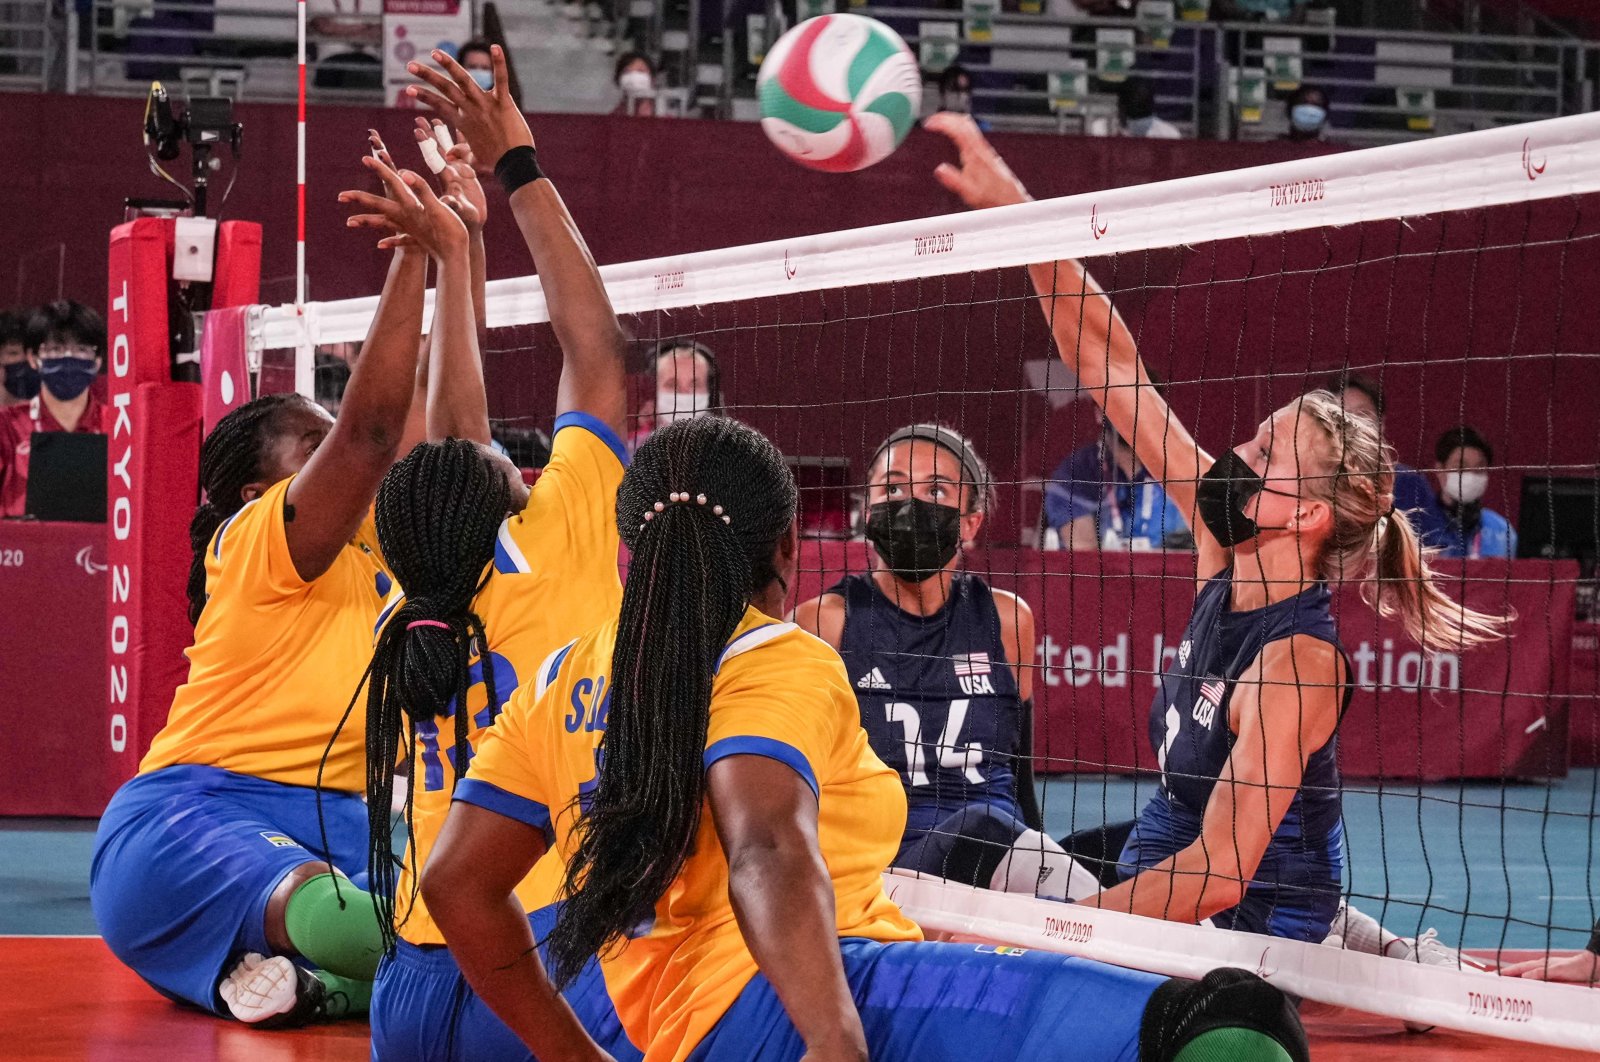 USA's Lora Webster (R) spikes the ball during the sitting volleyball pool match between USA and Rwanda during the Tokyo 2020 Paralympic Games at Makuhari Messe Hall in Chiba, Japan, Aug. 28, 2021. (Photo by Yasuyoshi CHIBA via AFP)